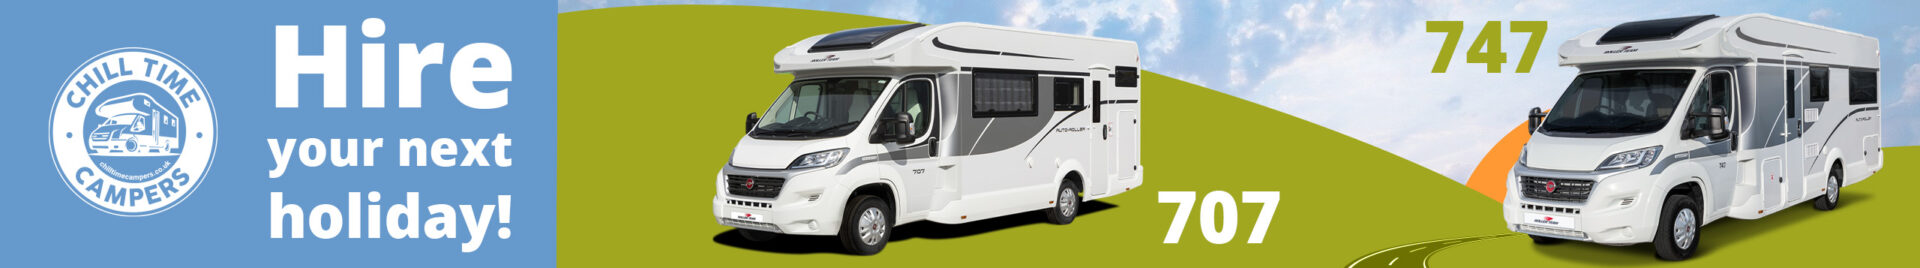 Chill Time Campers - Motorhome Hire, Caravanning & Camping Equipment